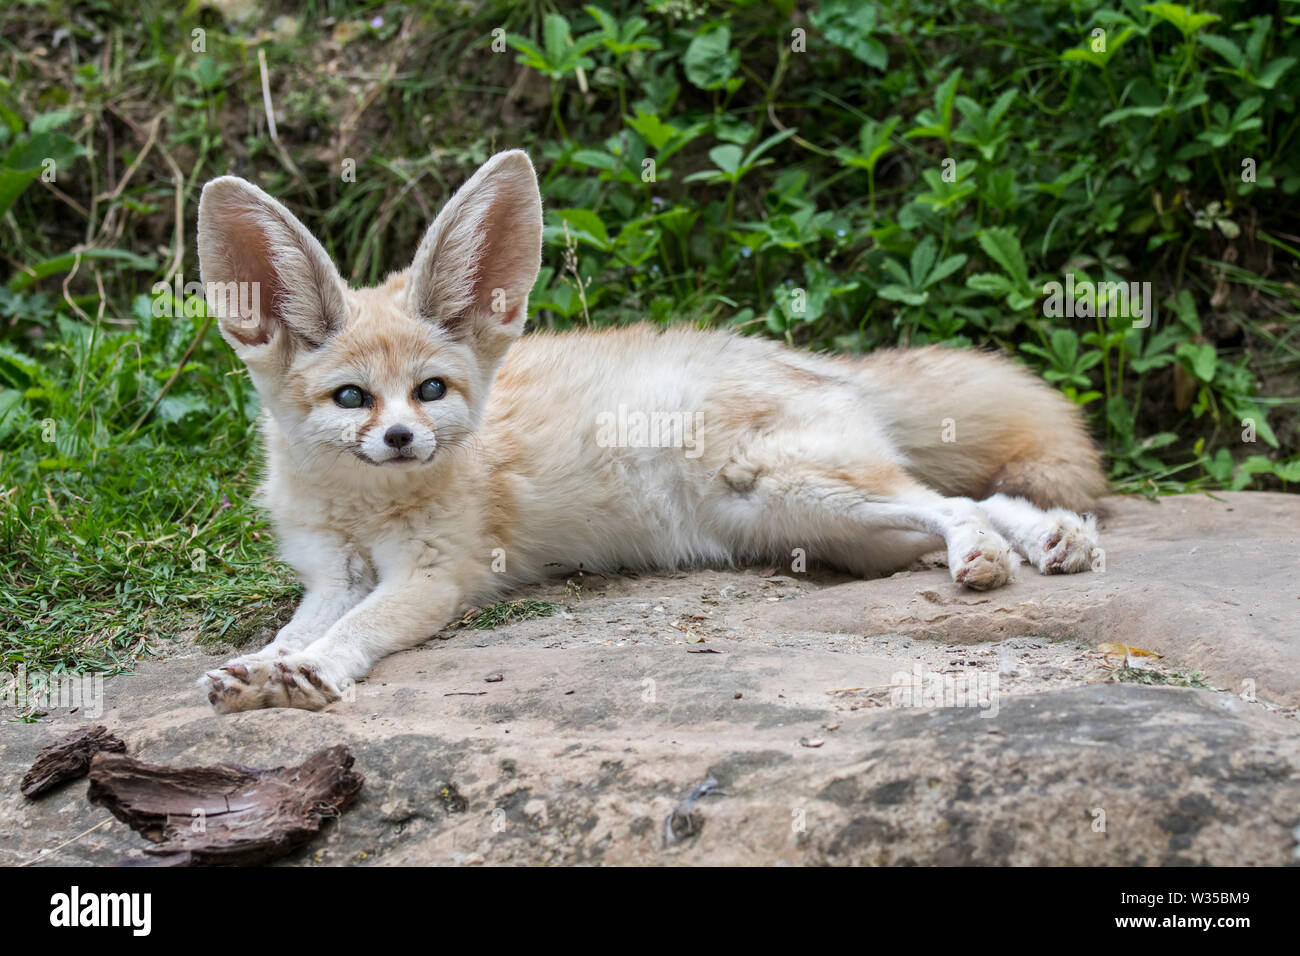 Captive fennec fox (Fennecus zerda / Vulpes zerda) suffering from glaucoma, eye disease common with fennecs in zoos Stock Photo